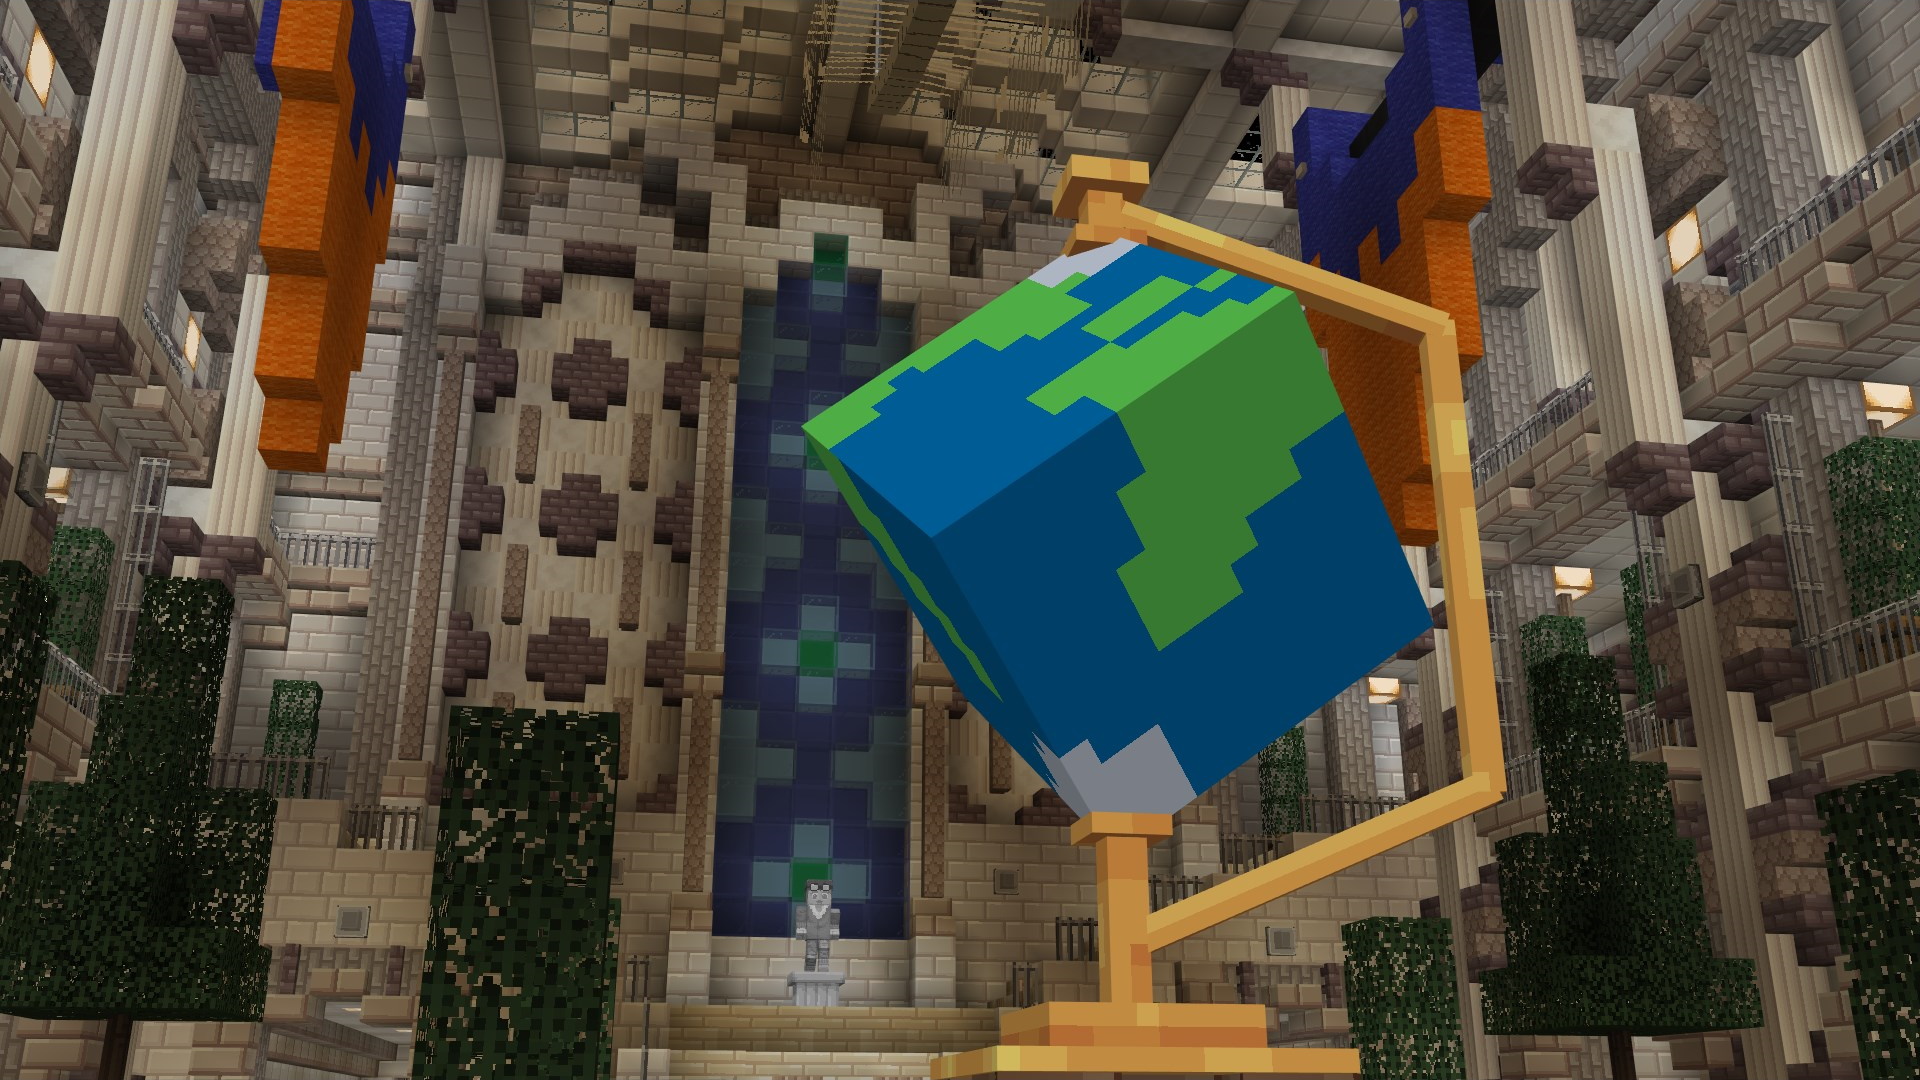 A screenshot within Minecraft of the globe from the museum lobby of Heist-Meisters. The globe is several metres tall. There are blue and orange banners hanging from the ceiling, and there are several trees on either side of the room. There is a staircase at the back of the room which leads up and to balconies on the left and right.